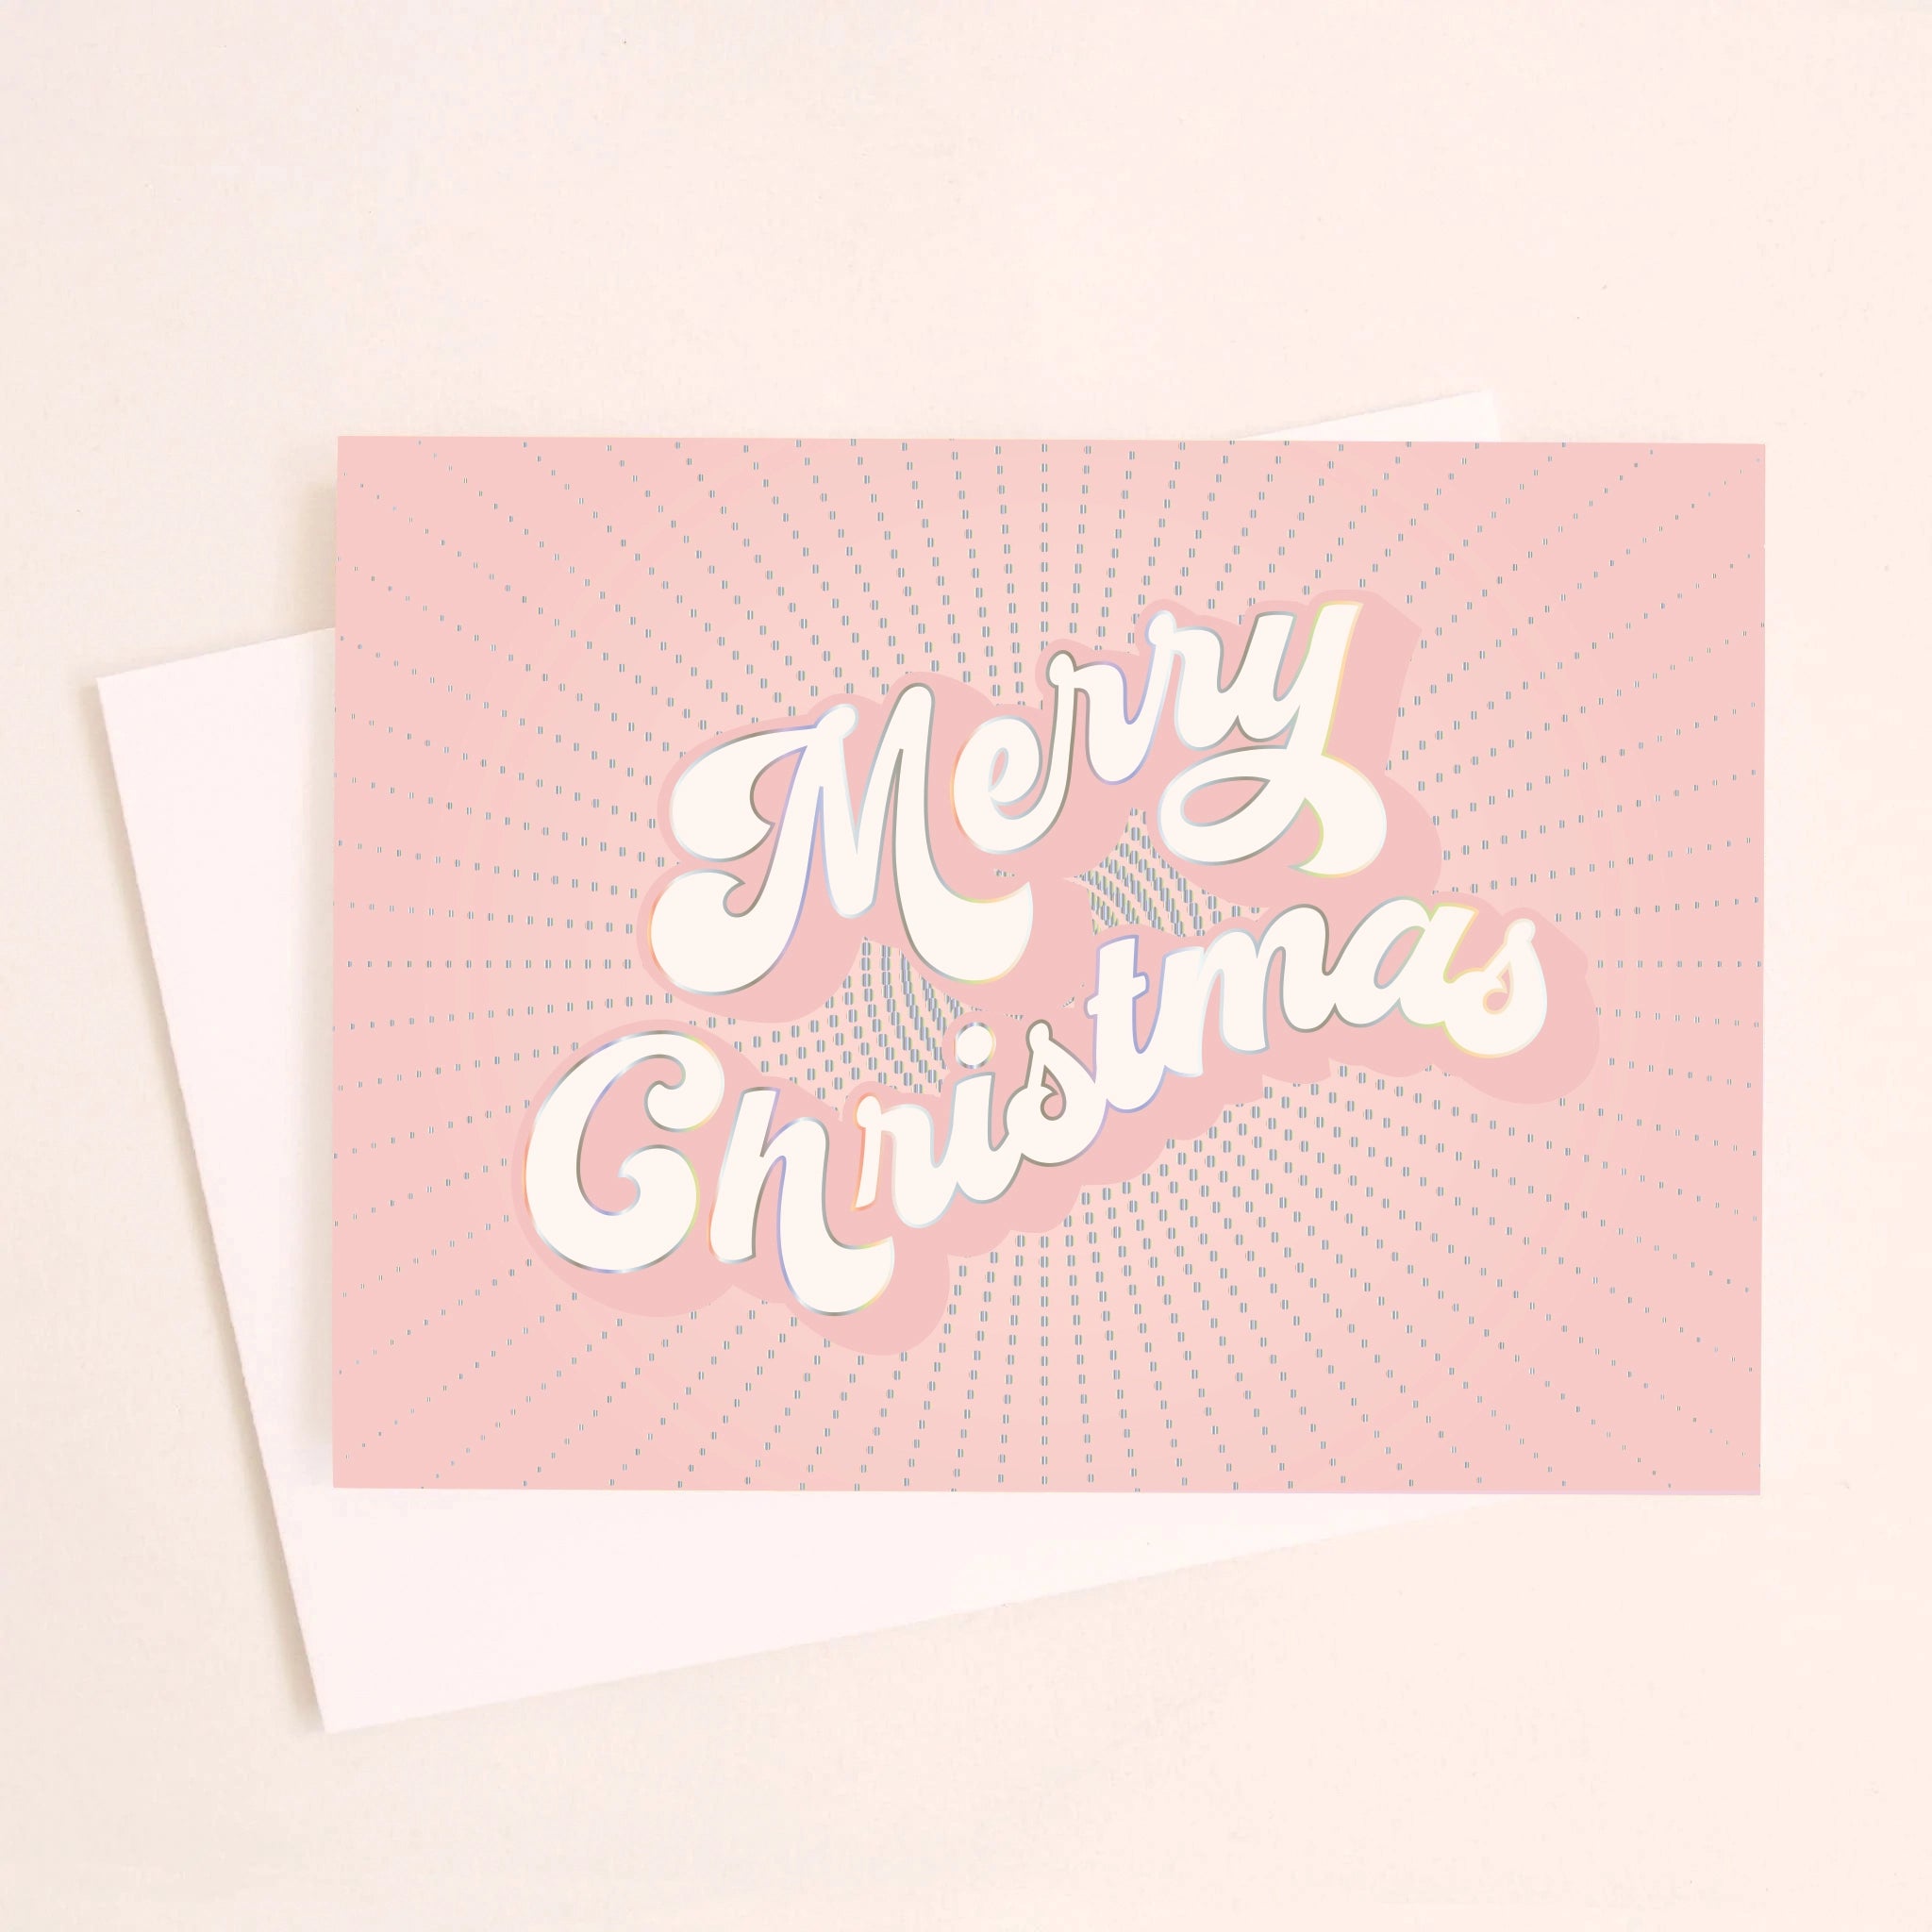 On a light pink background is a light pink greeting card with white text in the center that reads, "Merry Christmas" along with a white envelope.